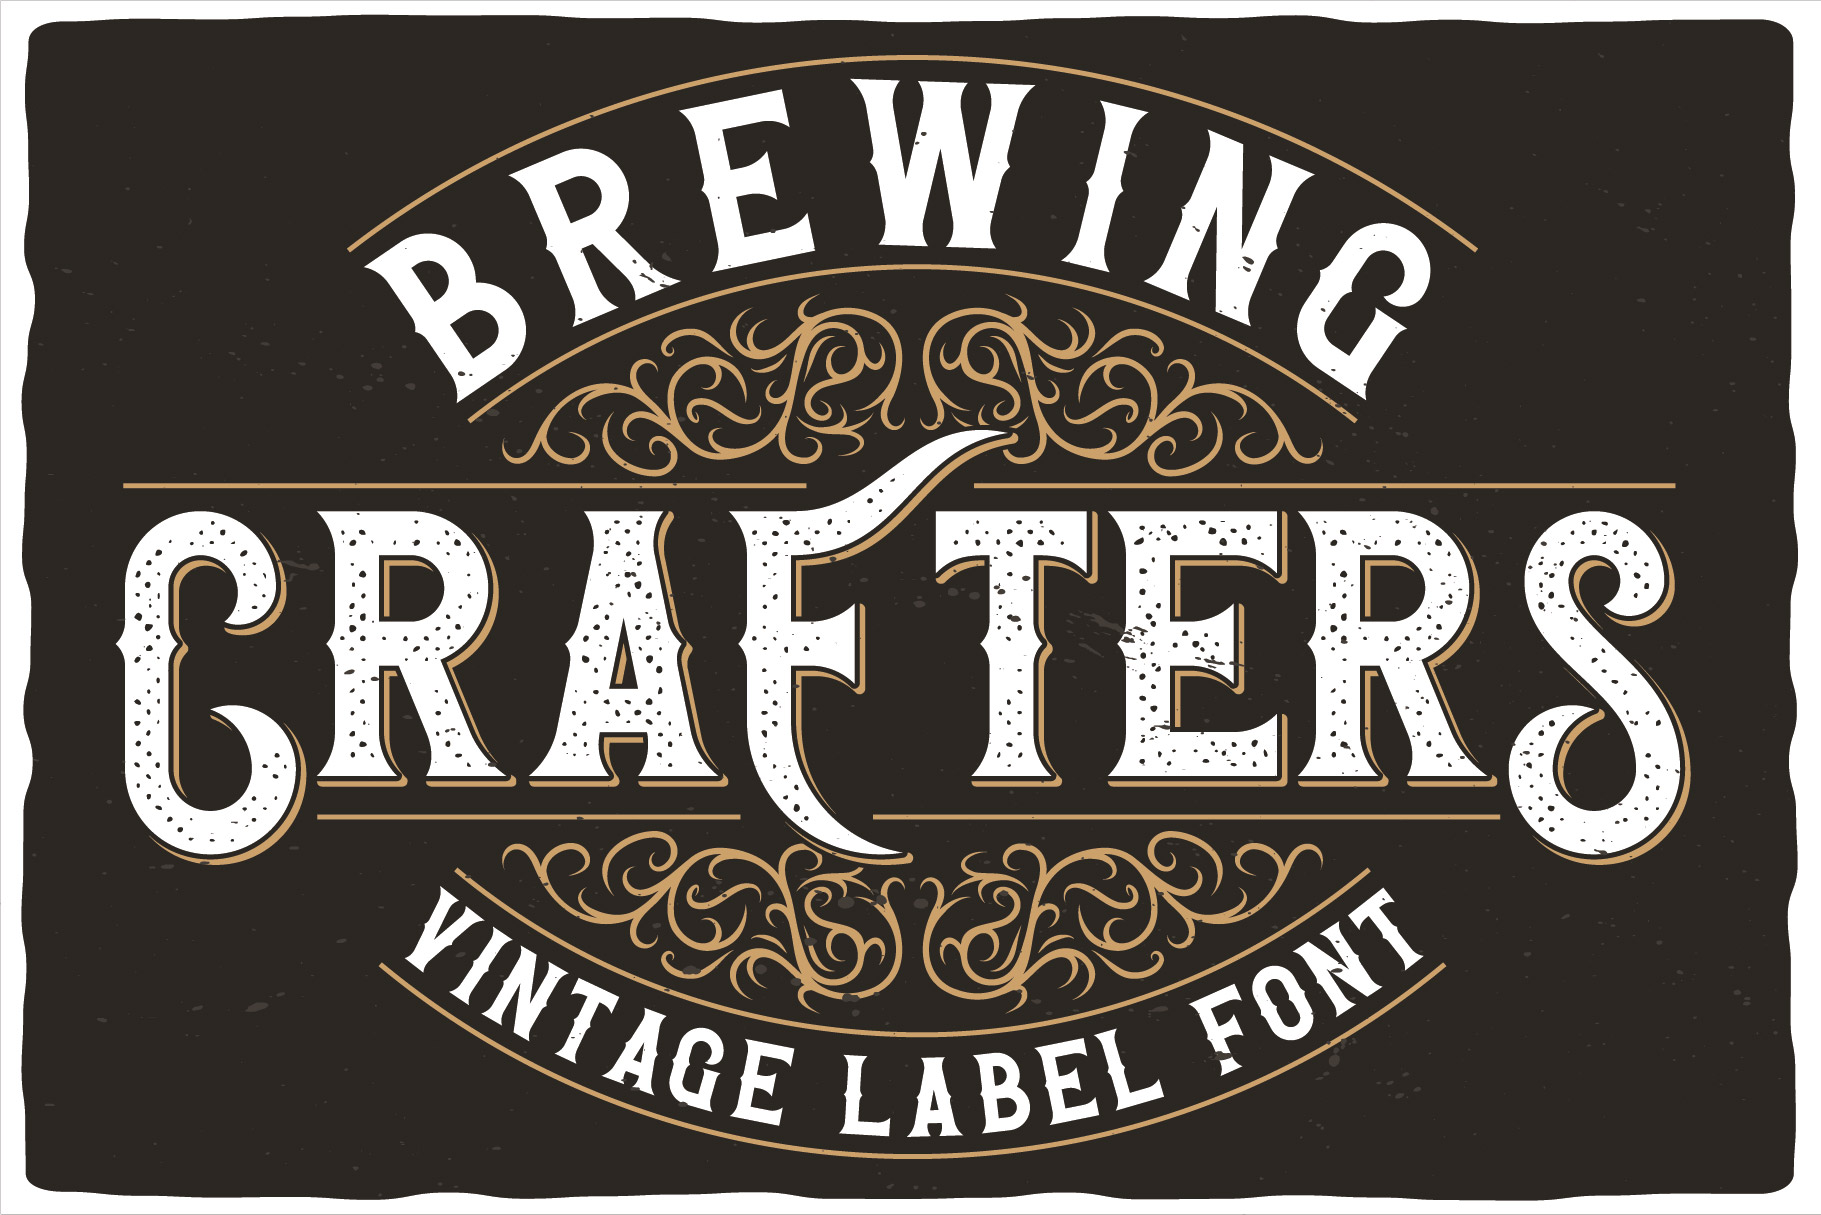 Brewing crafters vintage font.